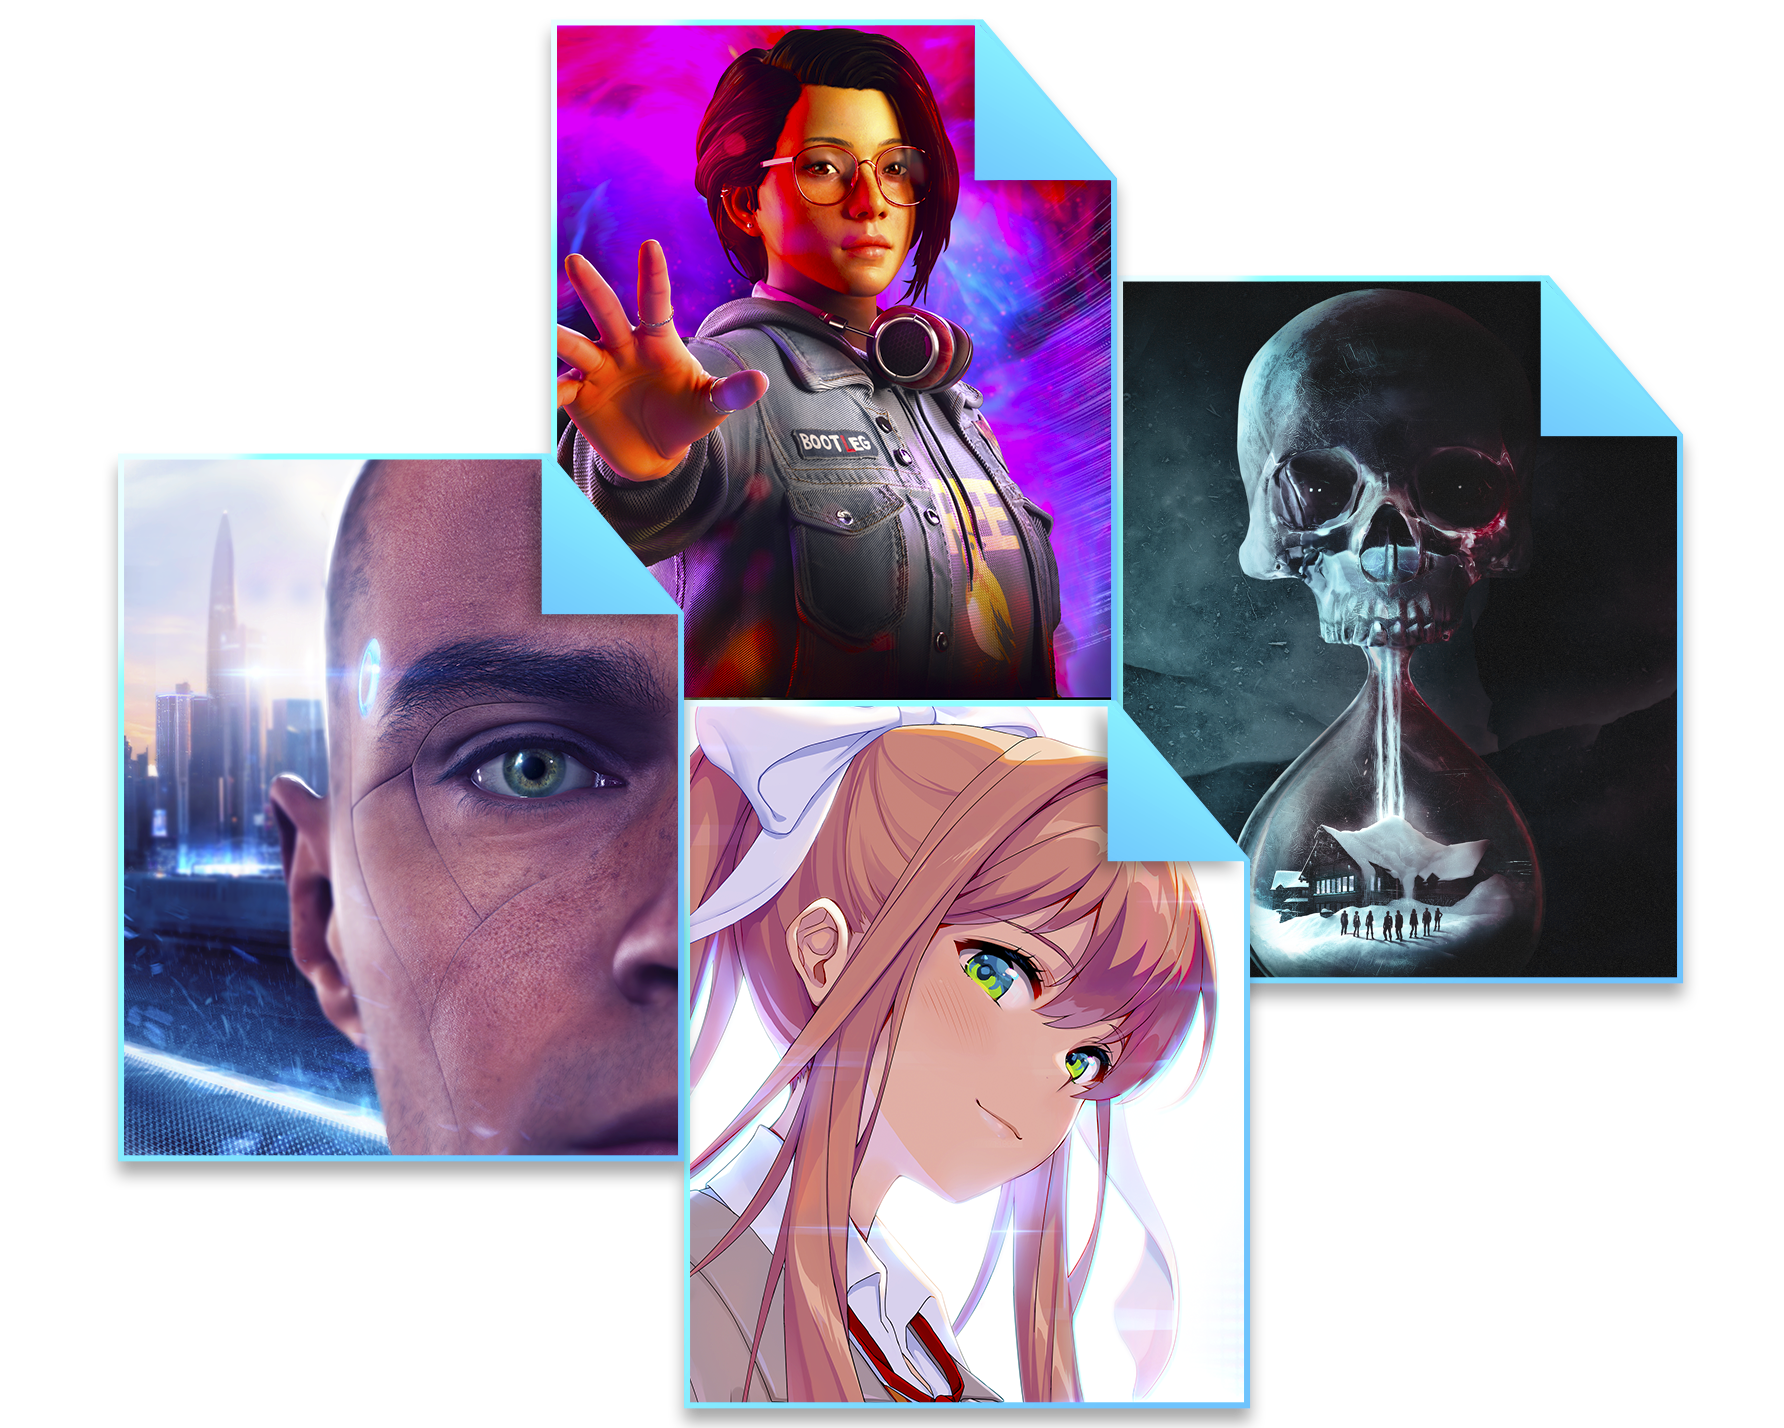 Composite image featuring key art from Life is Strange: True Colours, Detroit: Become Human, Doki Doki Literature Club Plus and Until Dawn.